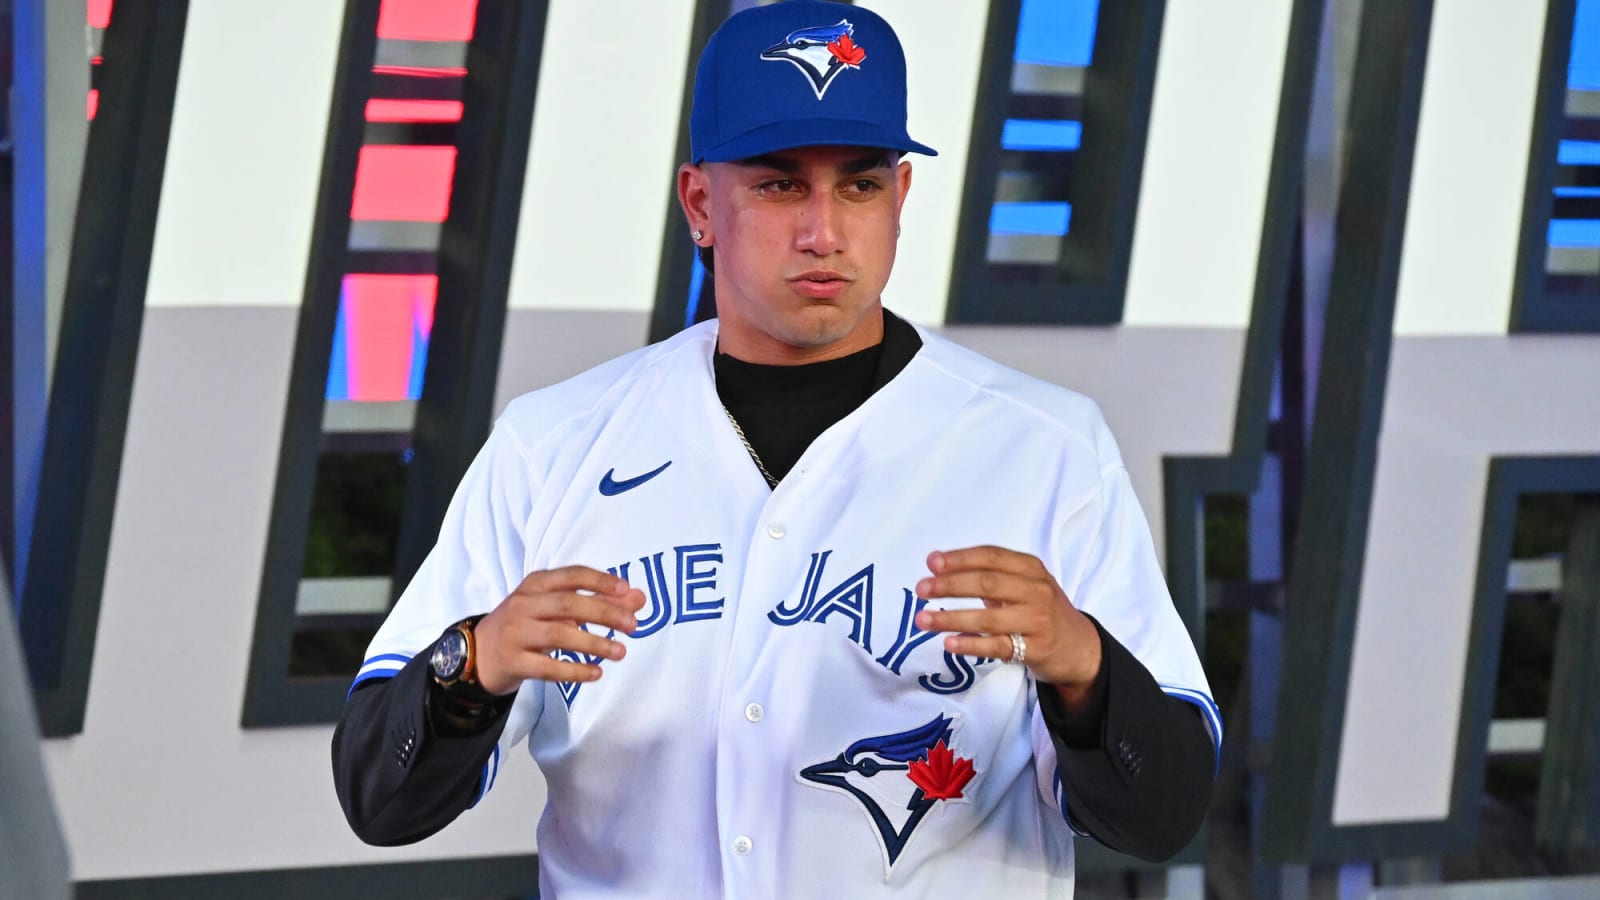 Blue Jays’ pitching prospect Brandon Barriera pitched four no-hit innings in his professional debut